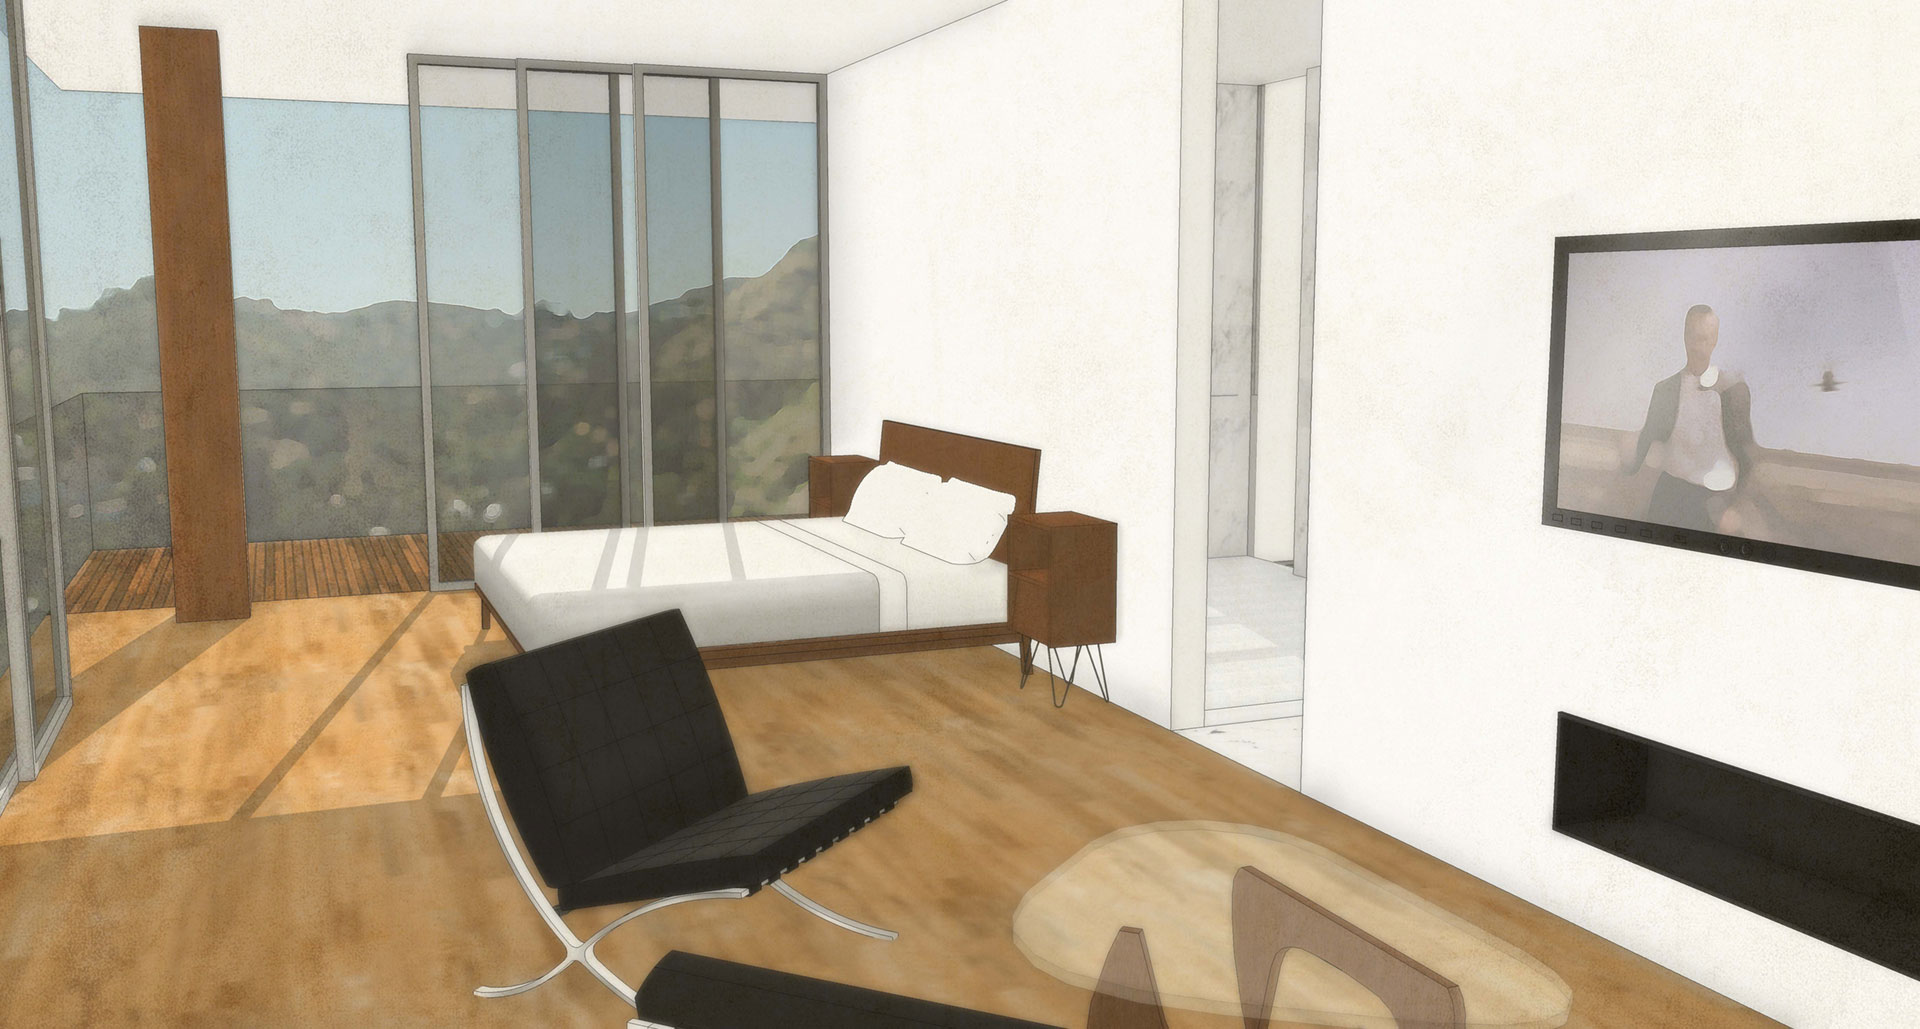 A rendered view of the master bedroom.